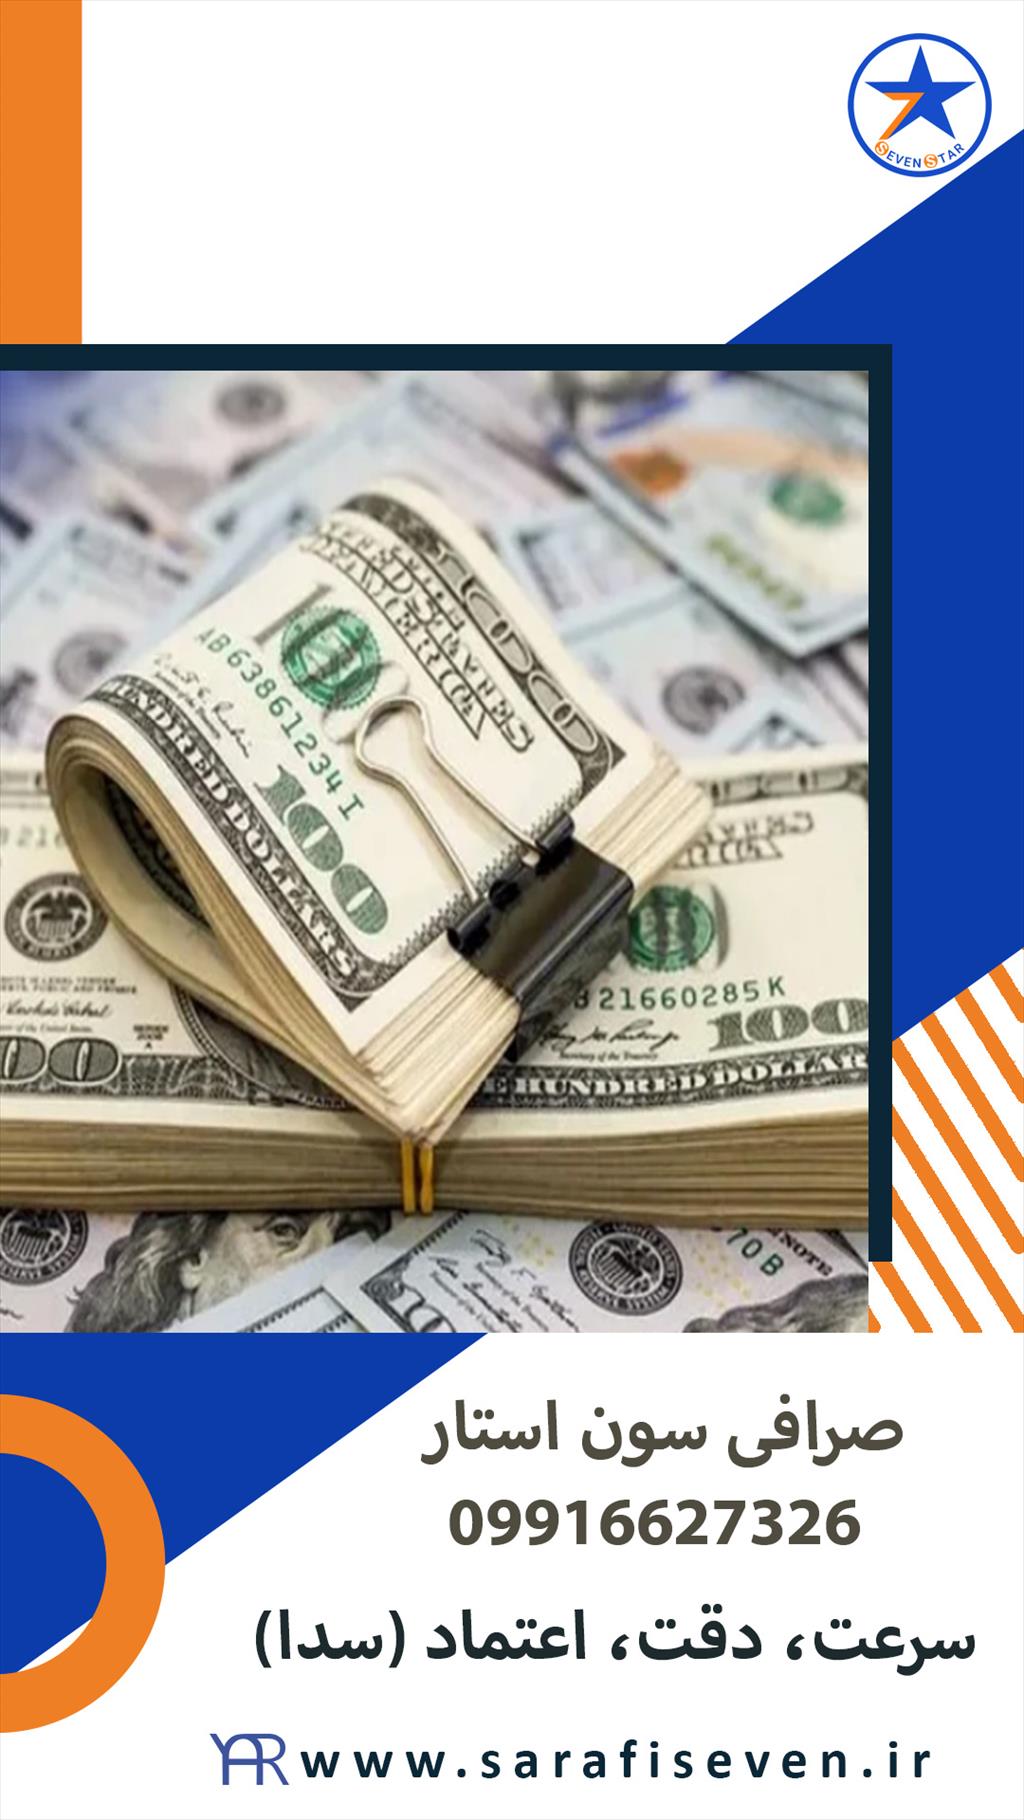 <br/>If you are a resident of Alborz province and Fardis city in Karaj and you intend to do foreign exchange, the best option for you is Seven Star Exchan services financial-legal-insurance financial-legal-insurance